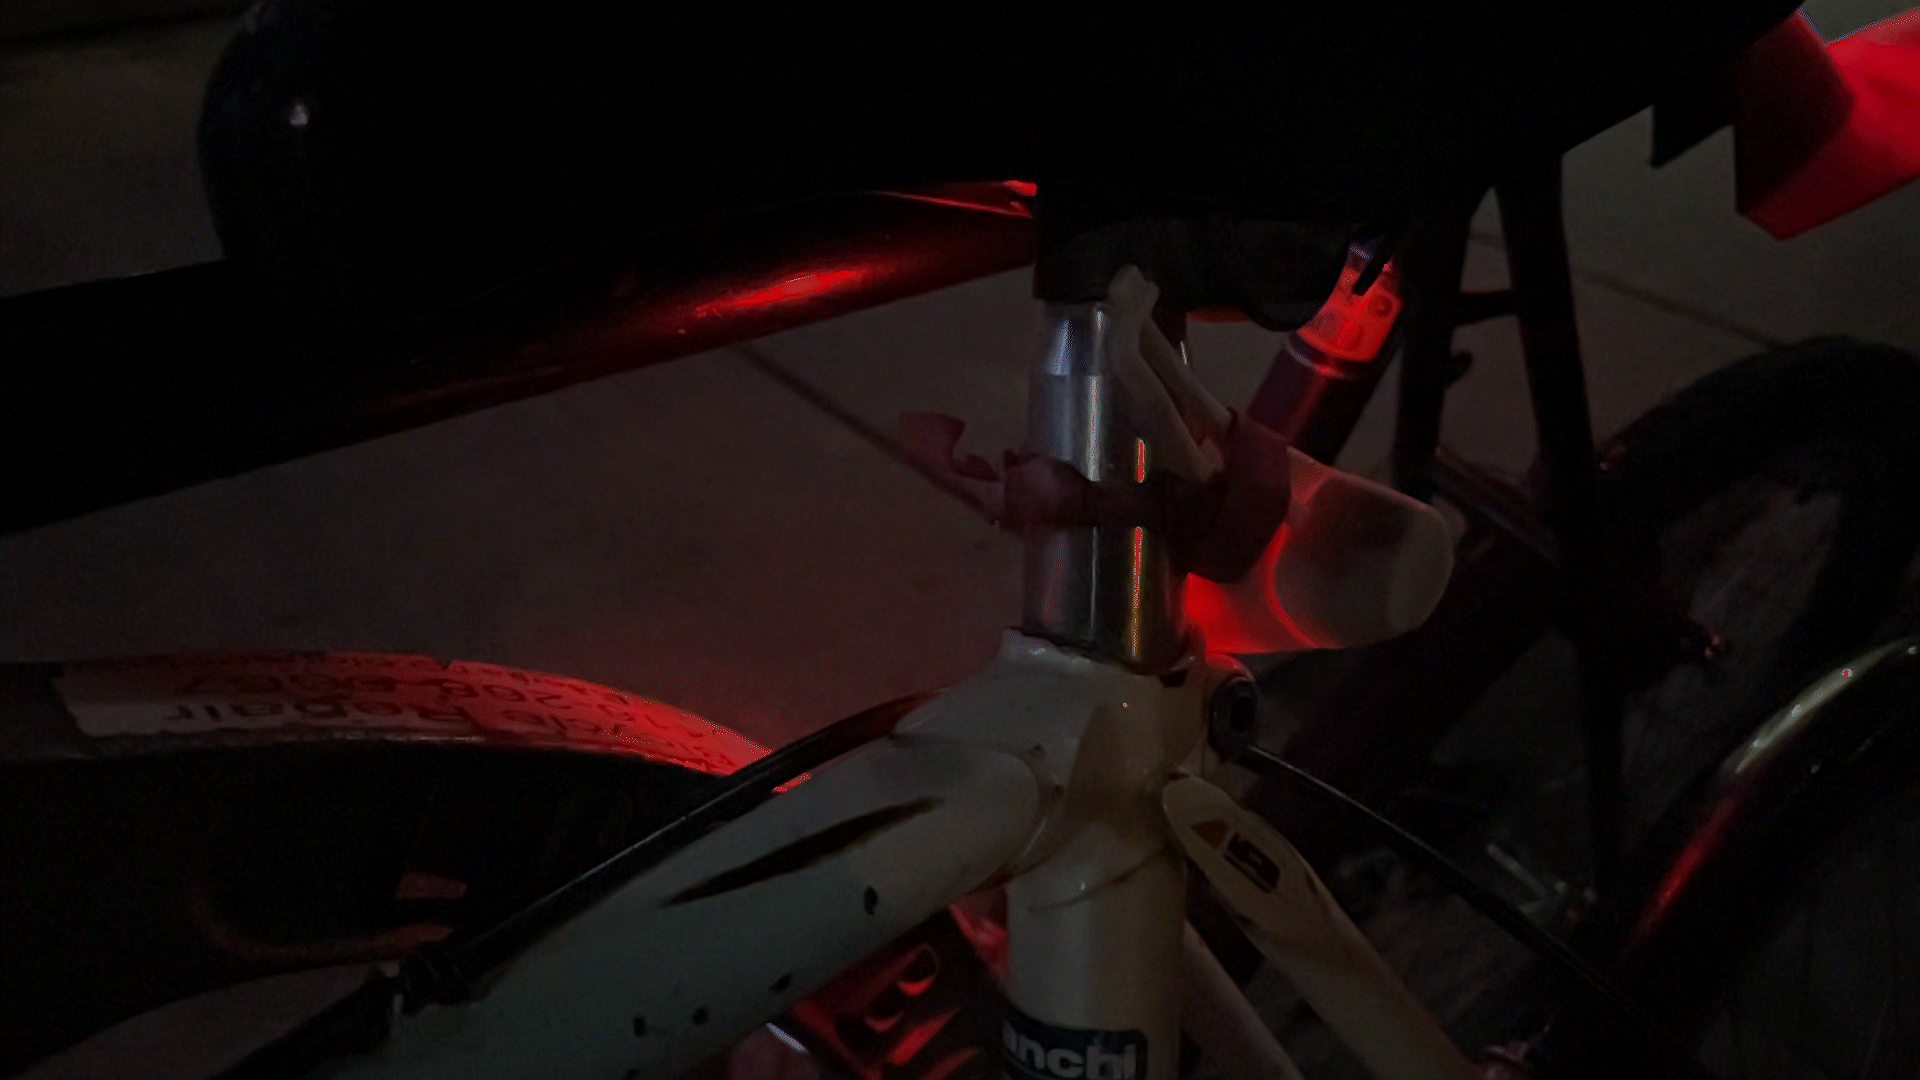 Someone left their light on - Bike lights 15 fps - Comp 6 - Walked by this bike that left the lights on.gif